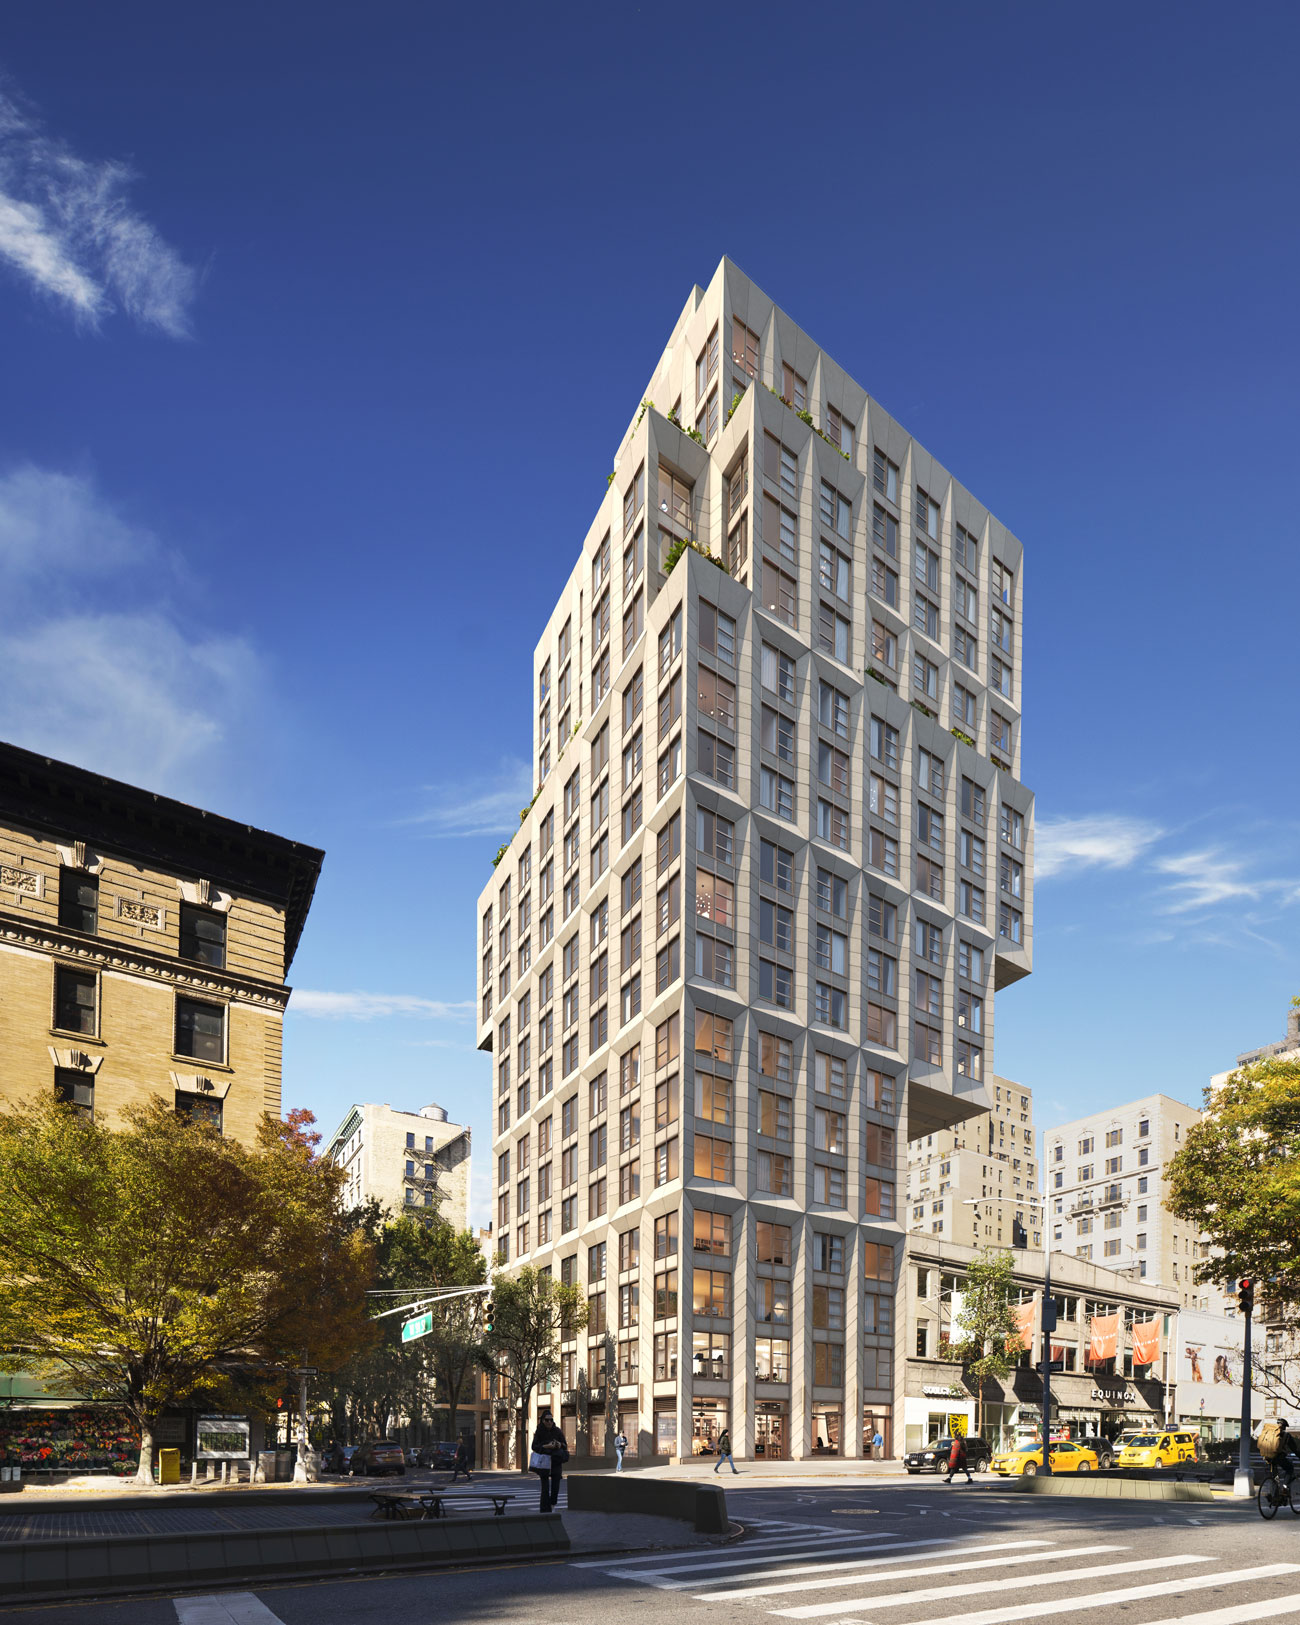 Architectural Rendering of the exterior of the ERA building project located on the Upper West Side in New York City